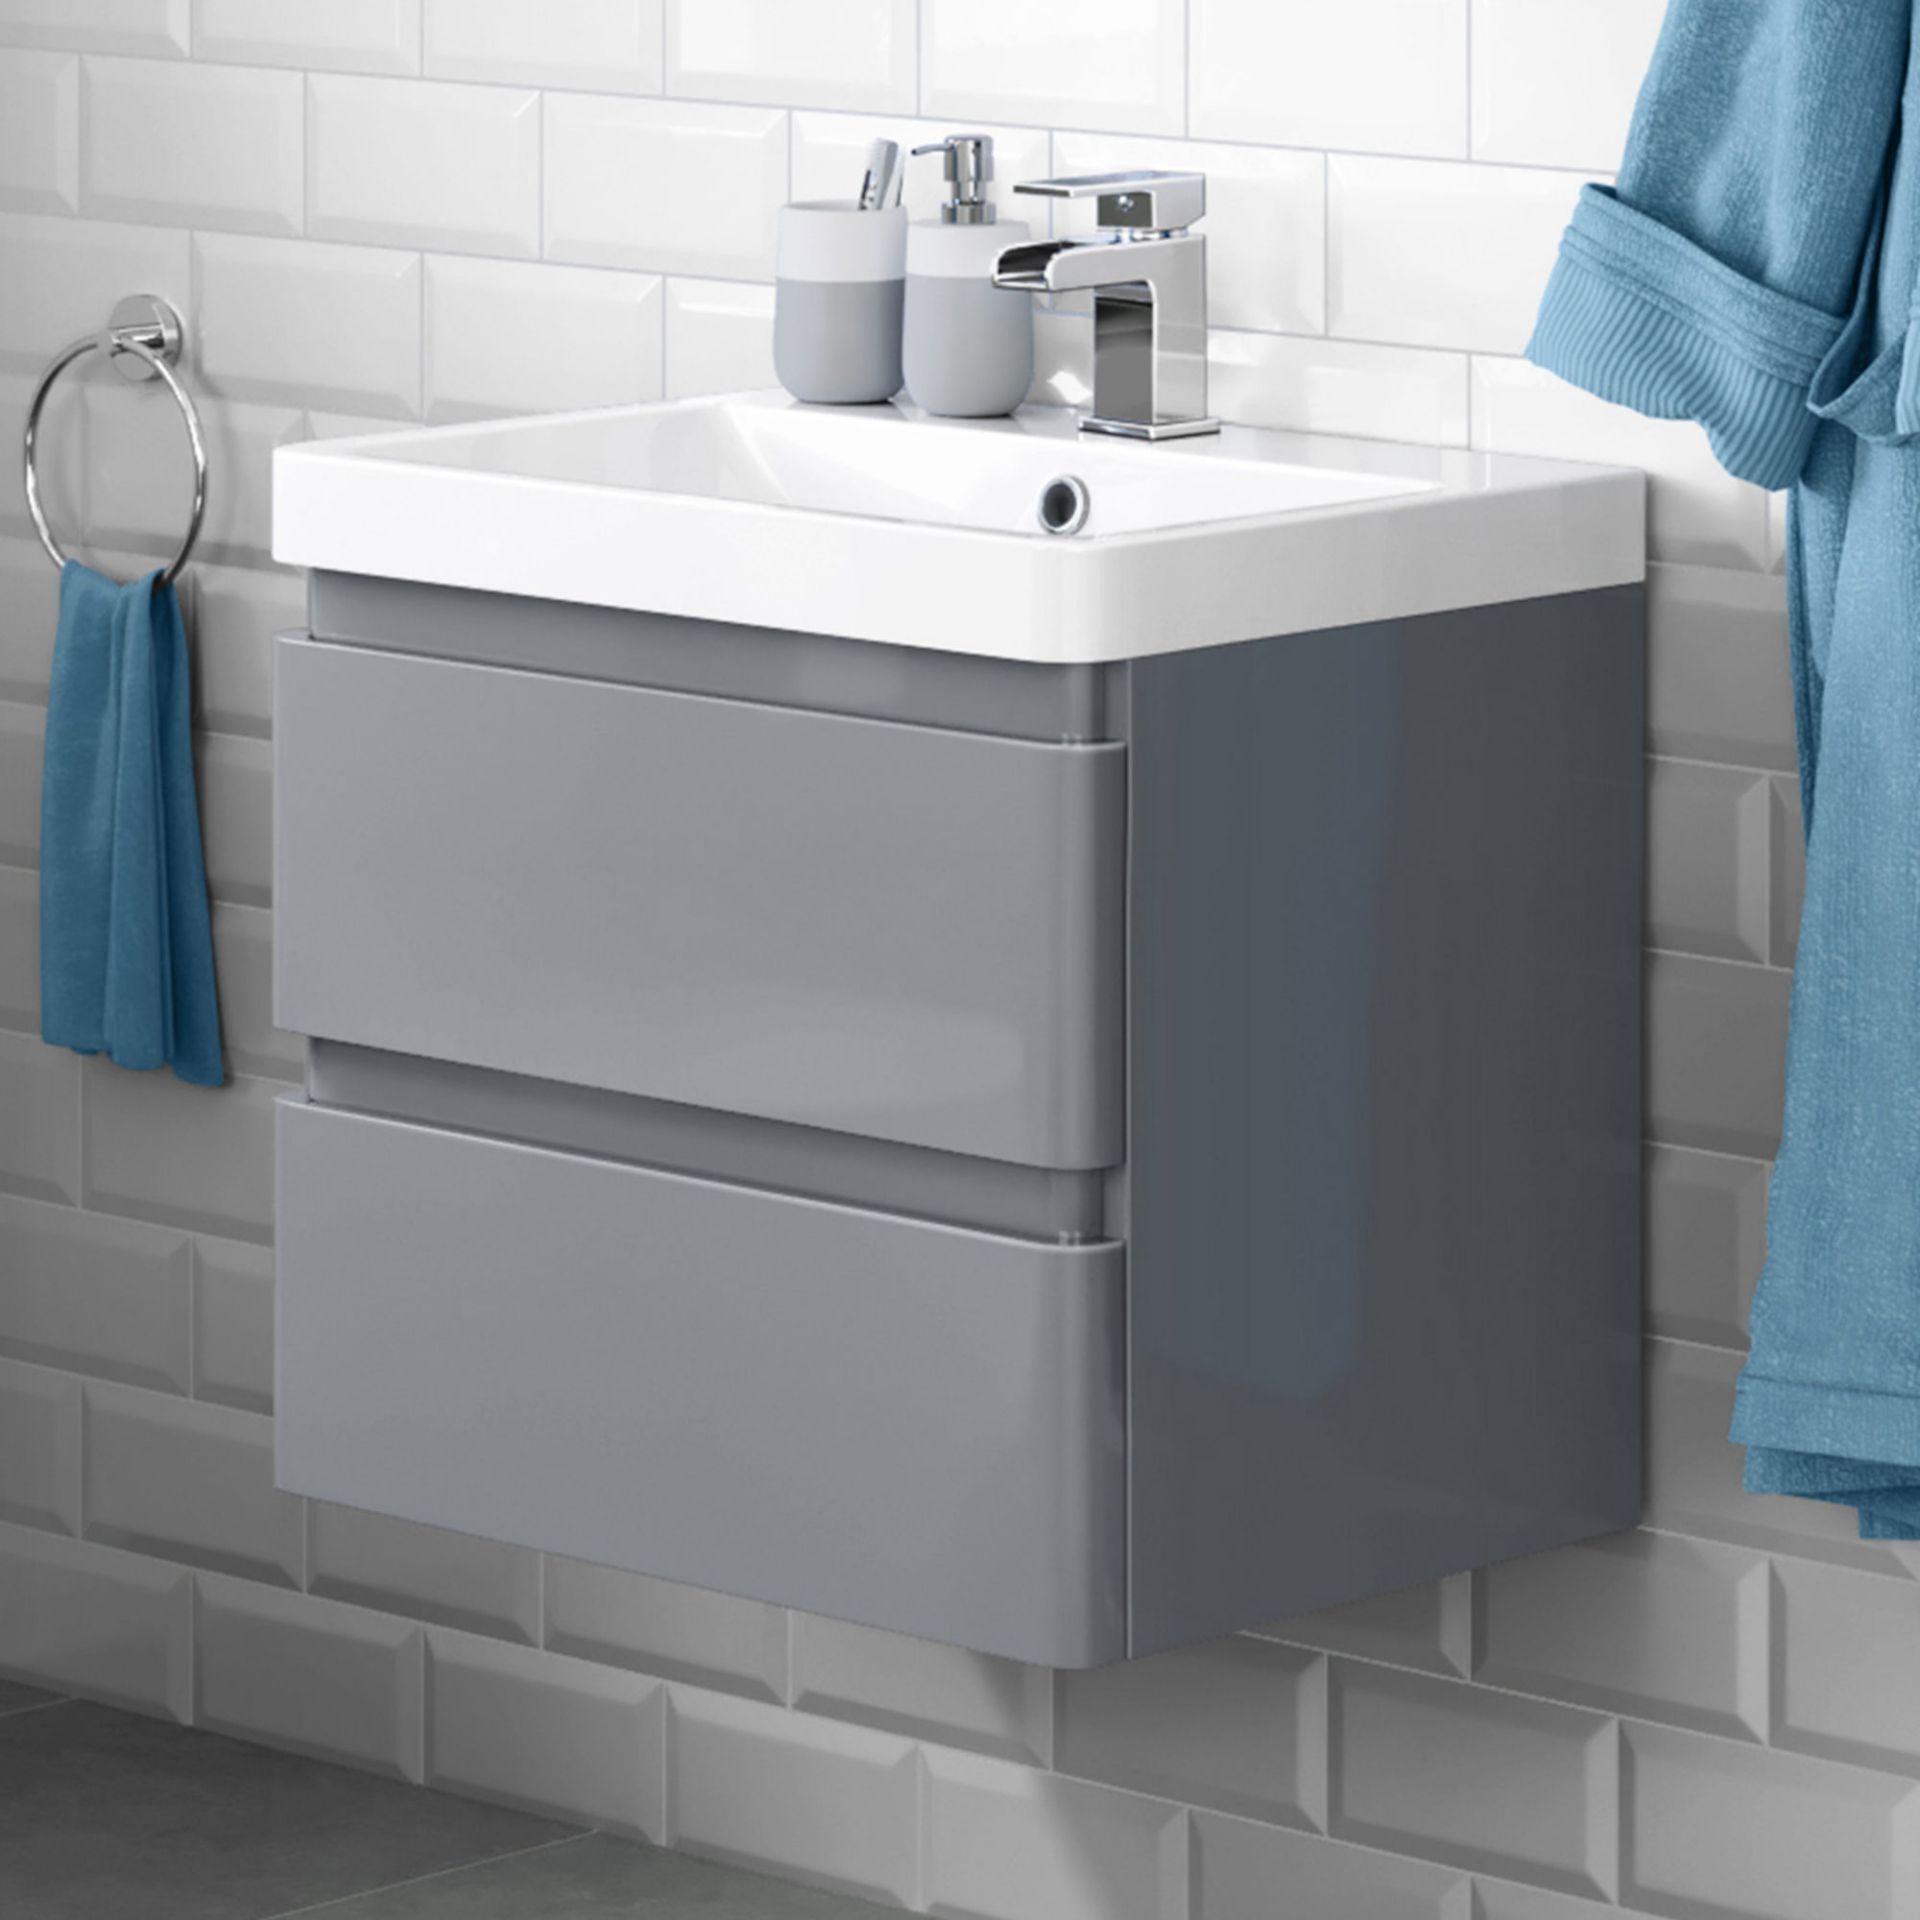 (DD29) 600mm Denver Gloss Grey Built In Sink Drawer Unit - Wall Hung. RRP £499.99. Comes com...